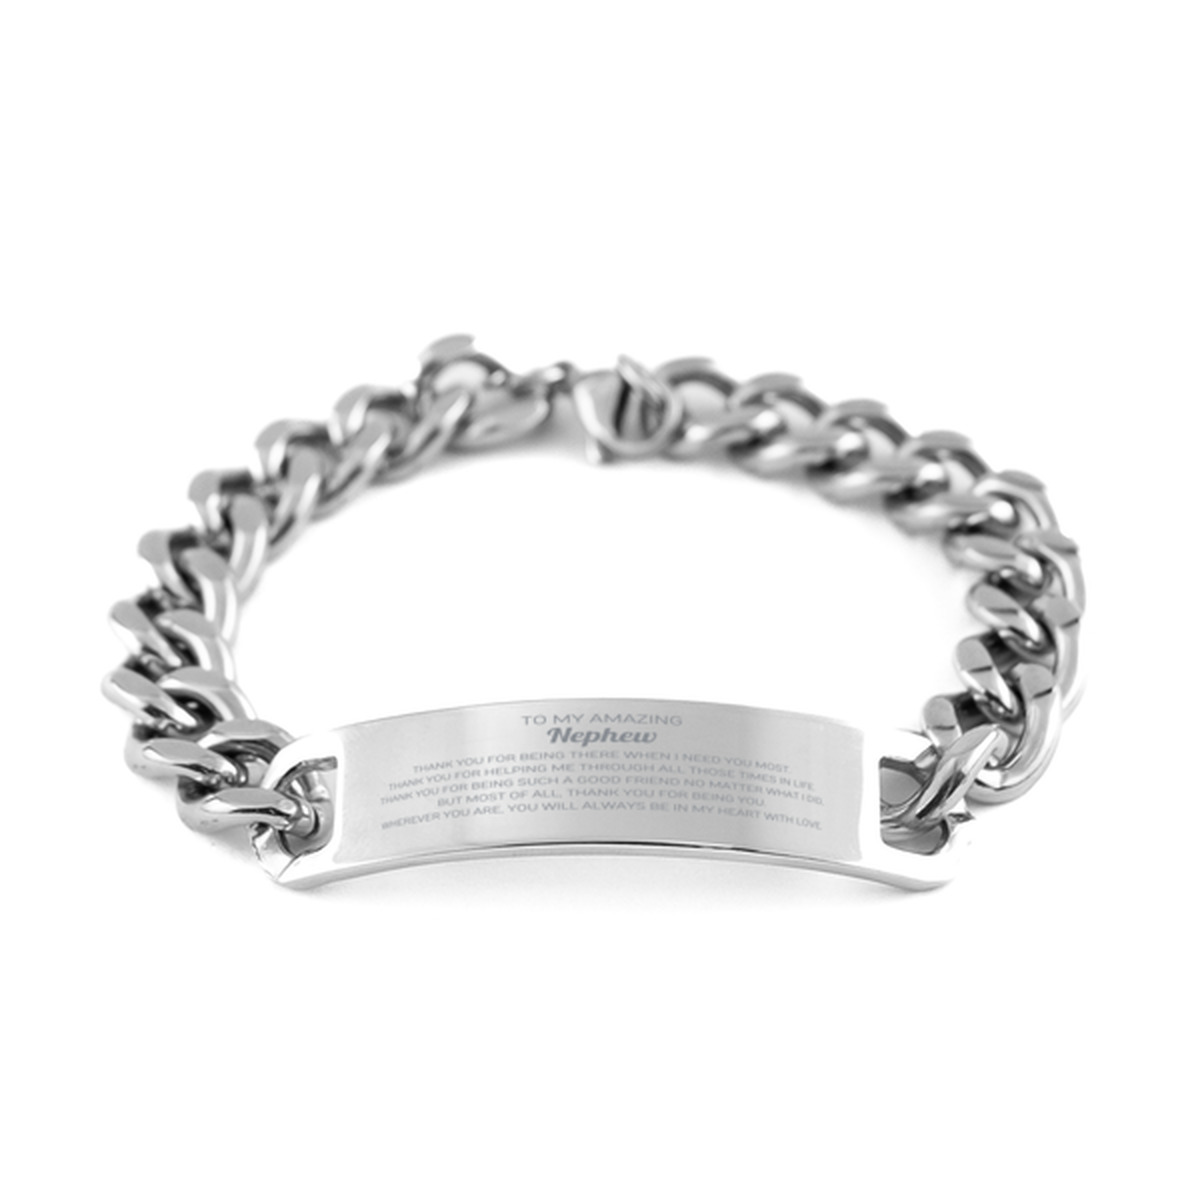 To My Amazing Nephew Cuban Chain Stainless Steel Bracelet, Thank you for being there, Thank You Gifts For Nephew, Birthday, Christmas Unique Gifts For Nephew